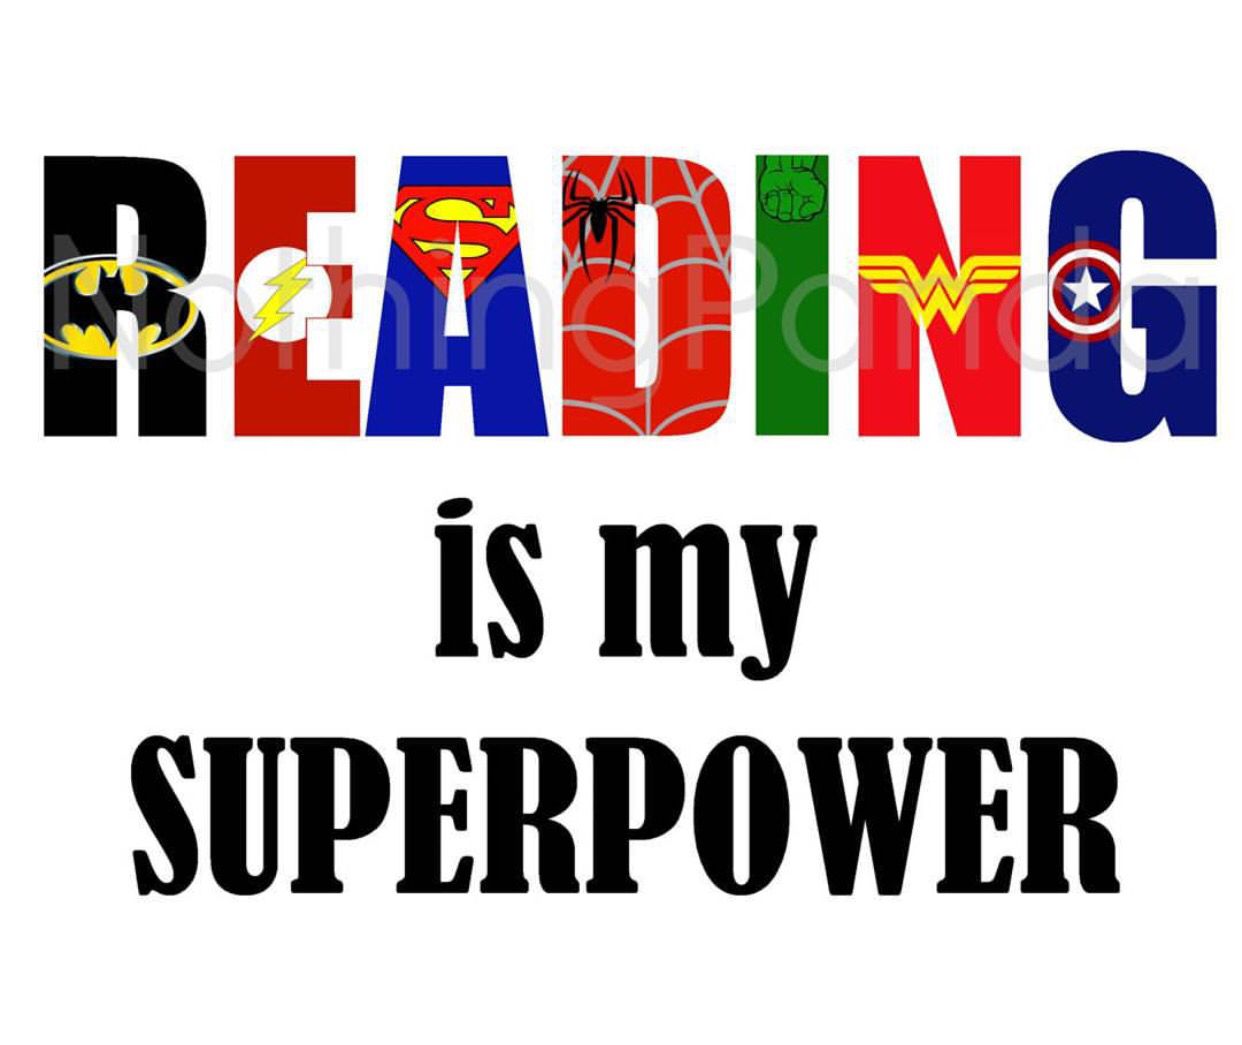 Superpowers book quotes superhero. Hero clipart superpower